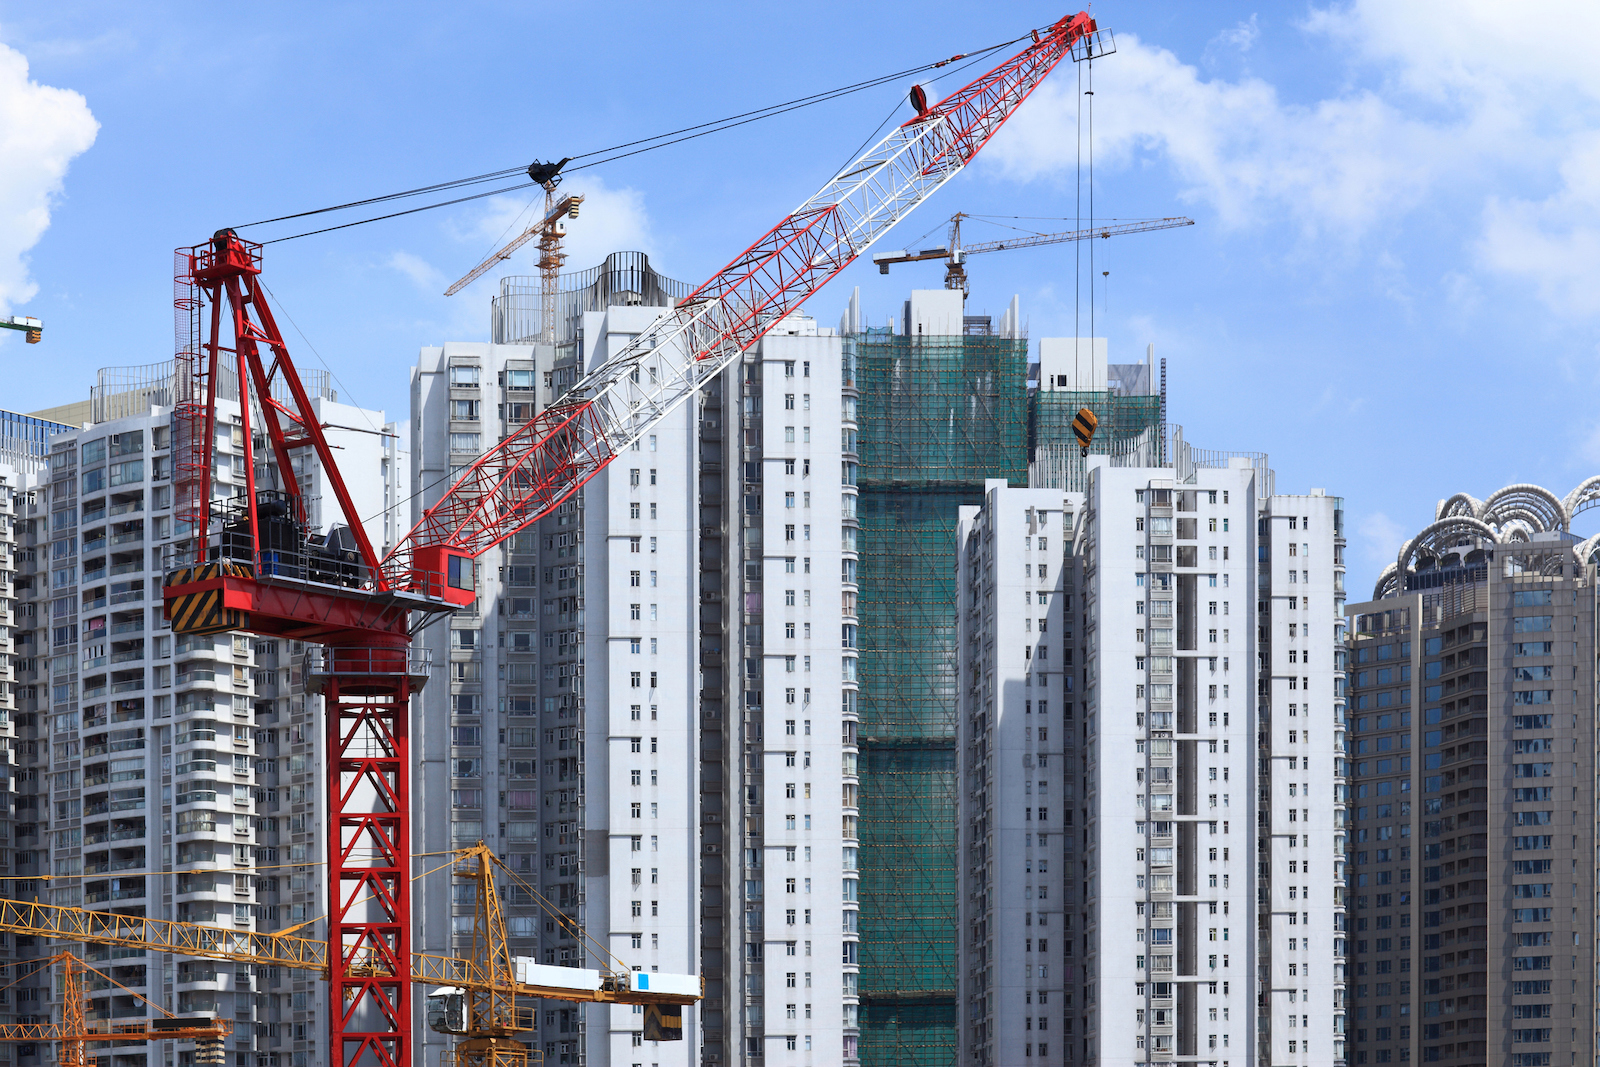 China Property Default Woes Deepen on Evergrande Uncertainty